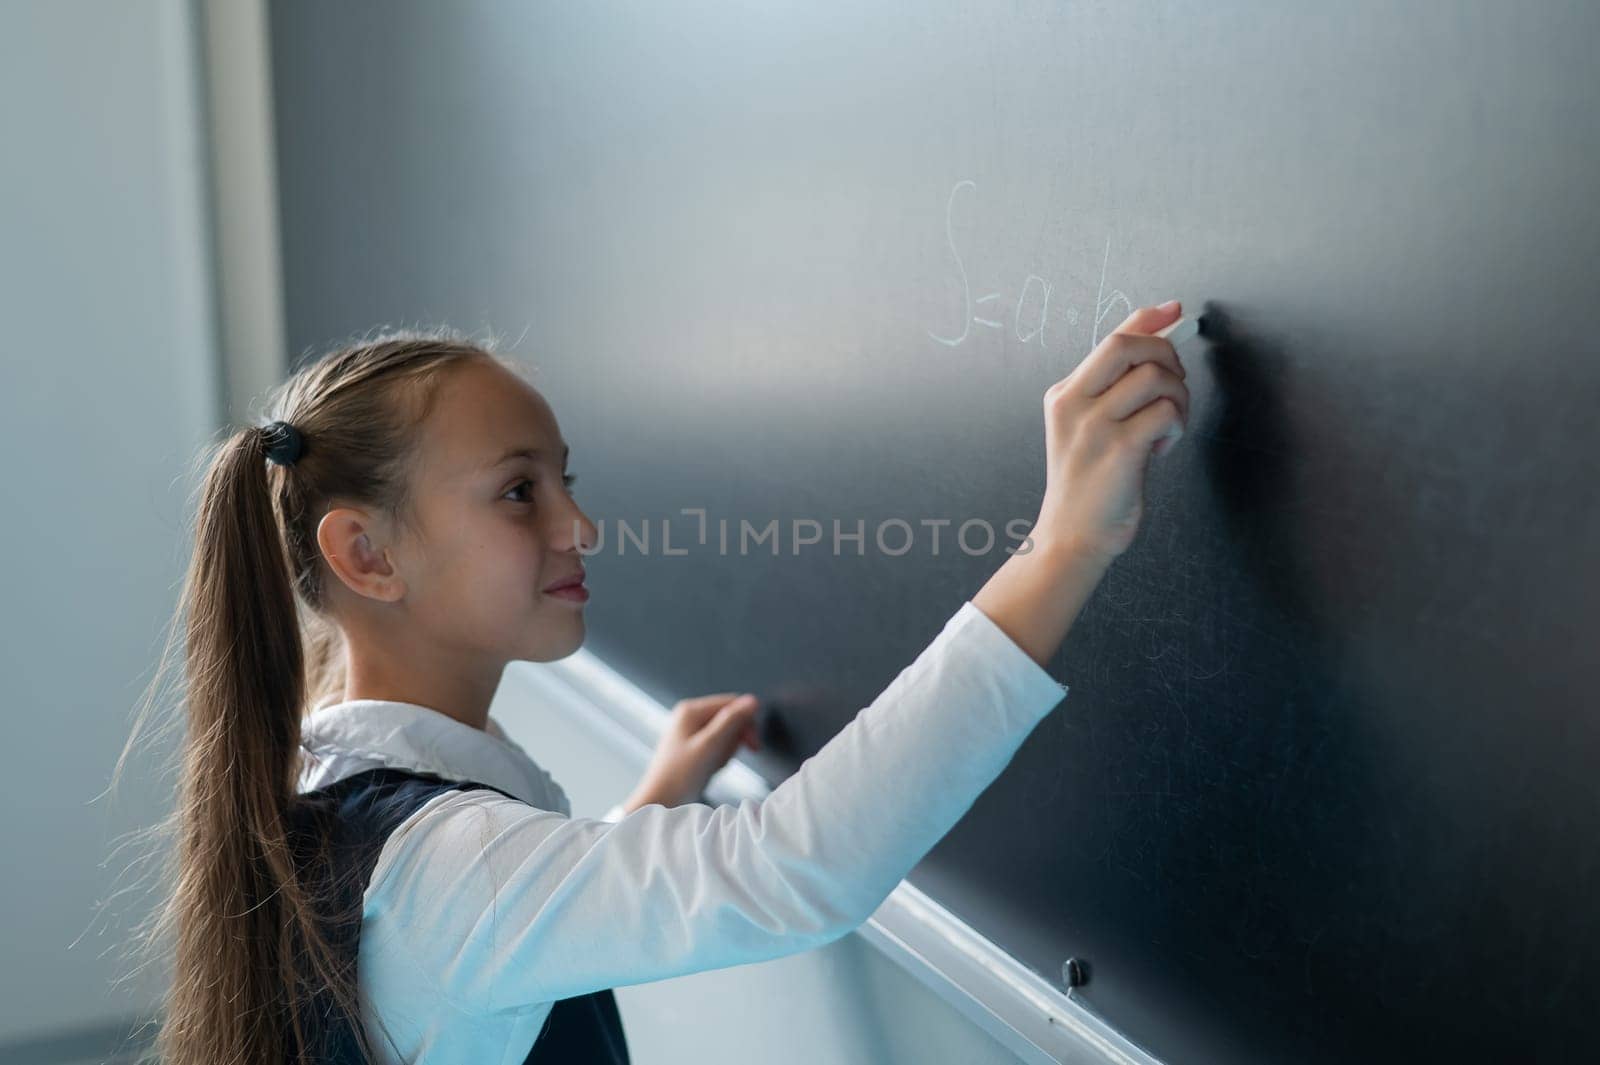 The schoolgirl answers at the lesson. Caucasian girl writes a formula on a blackboard